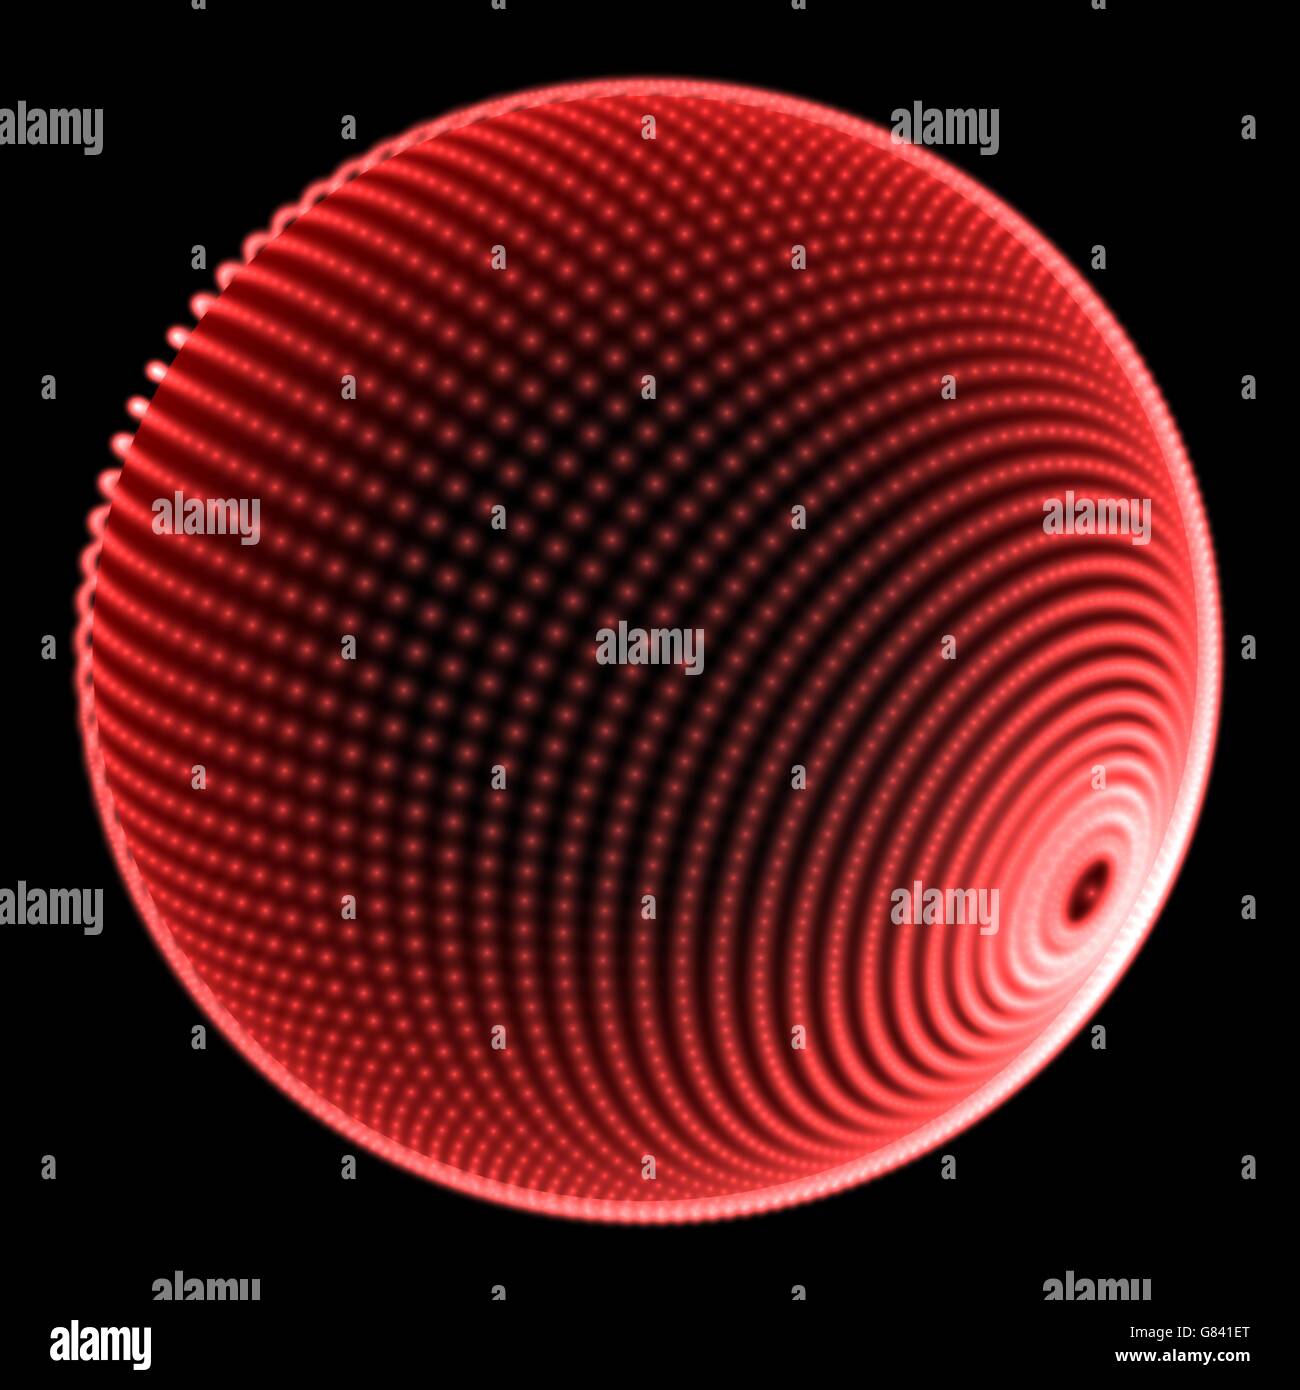 Hologram style red dotted sphere Stock Photo